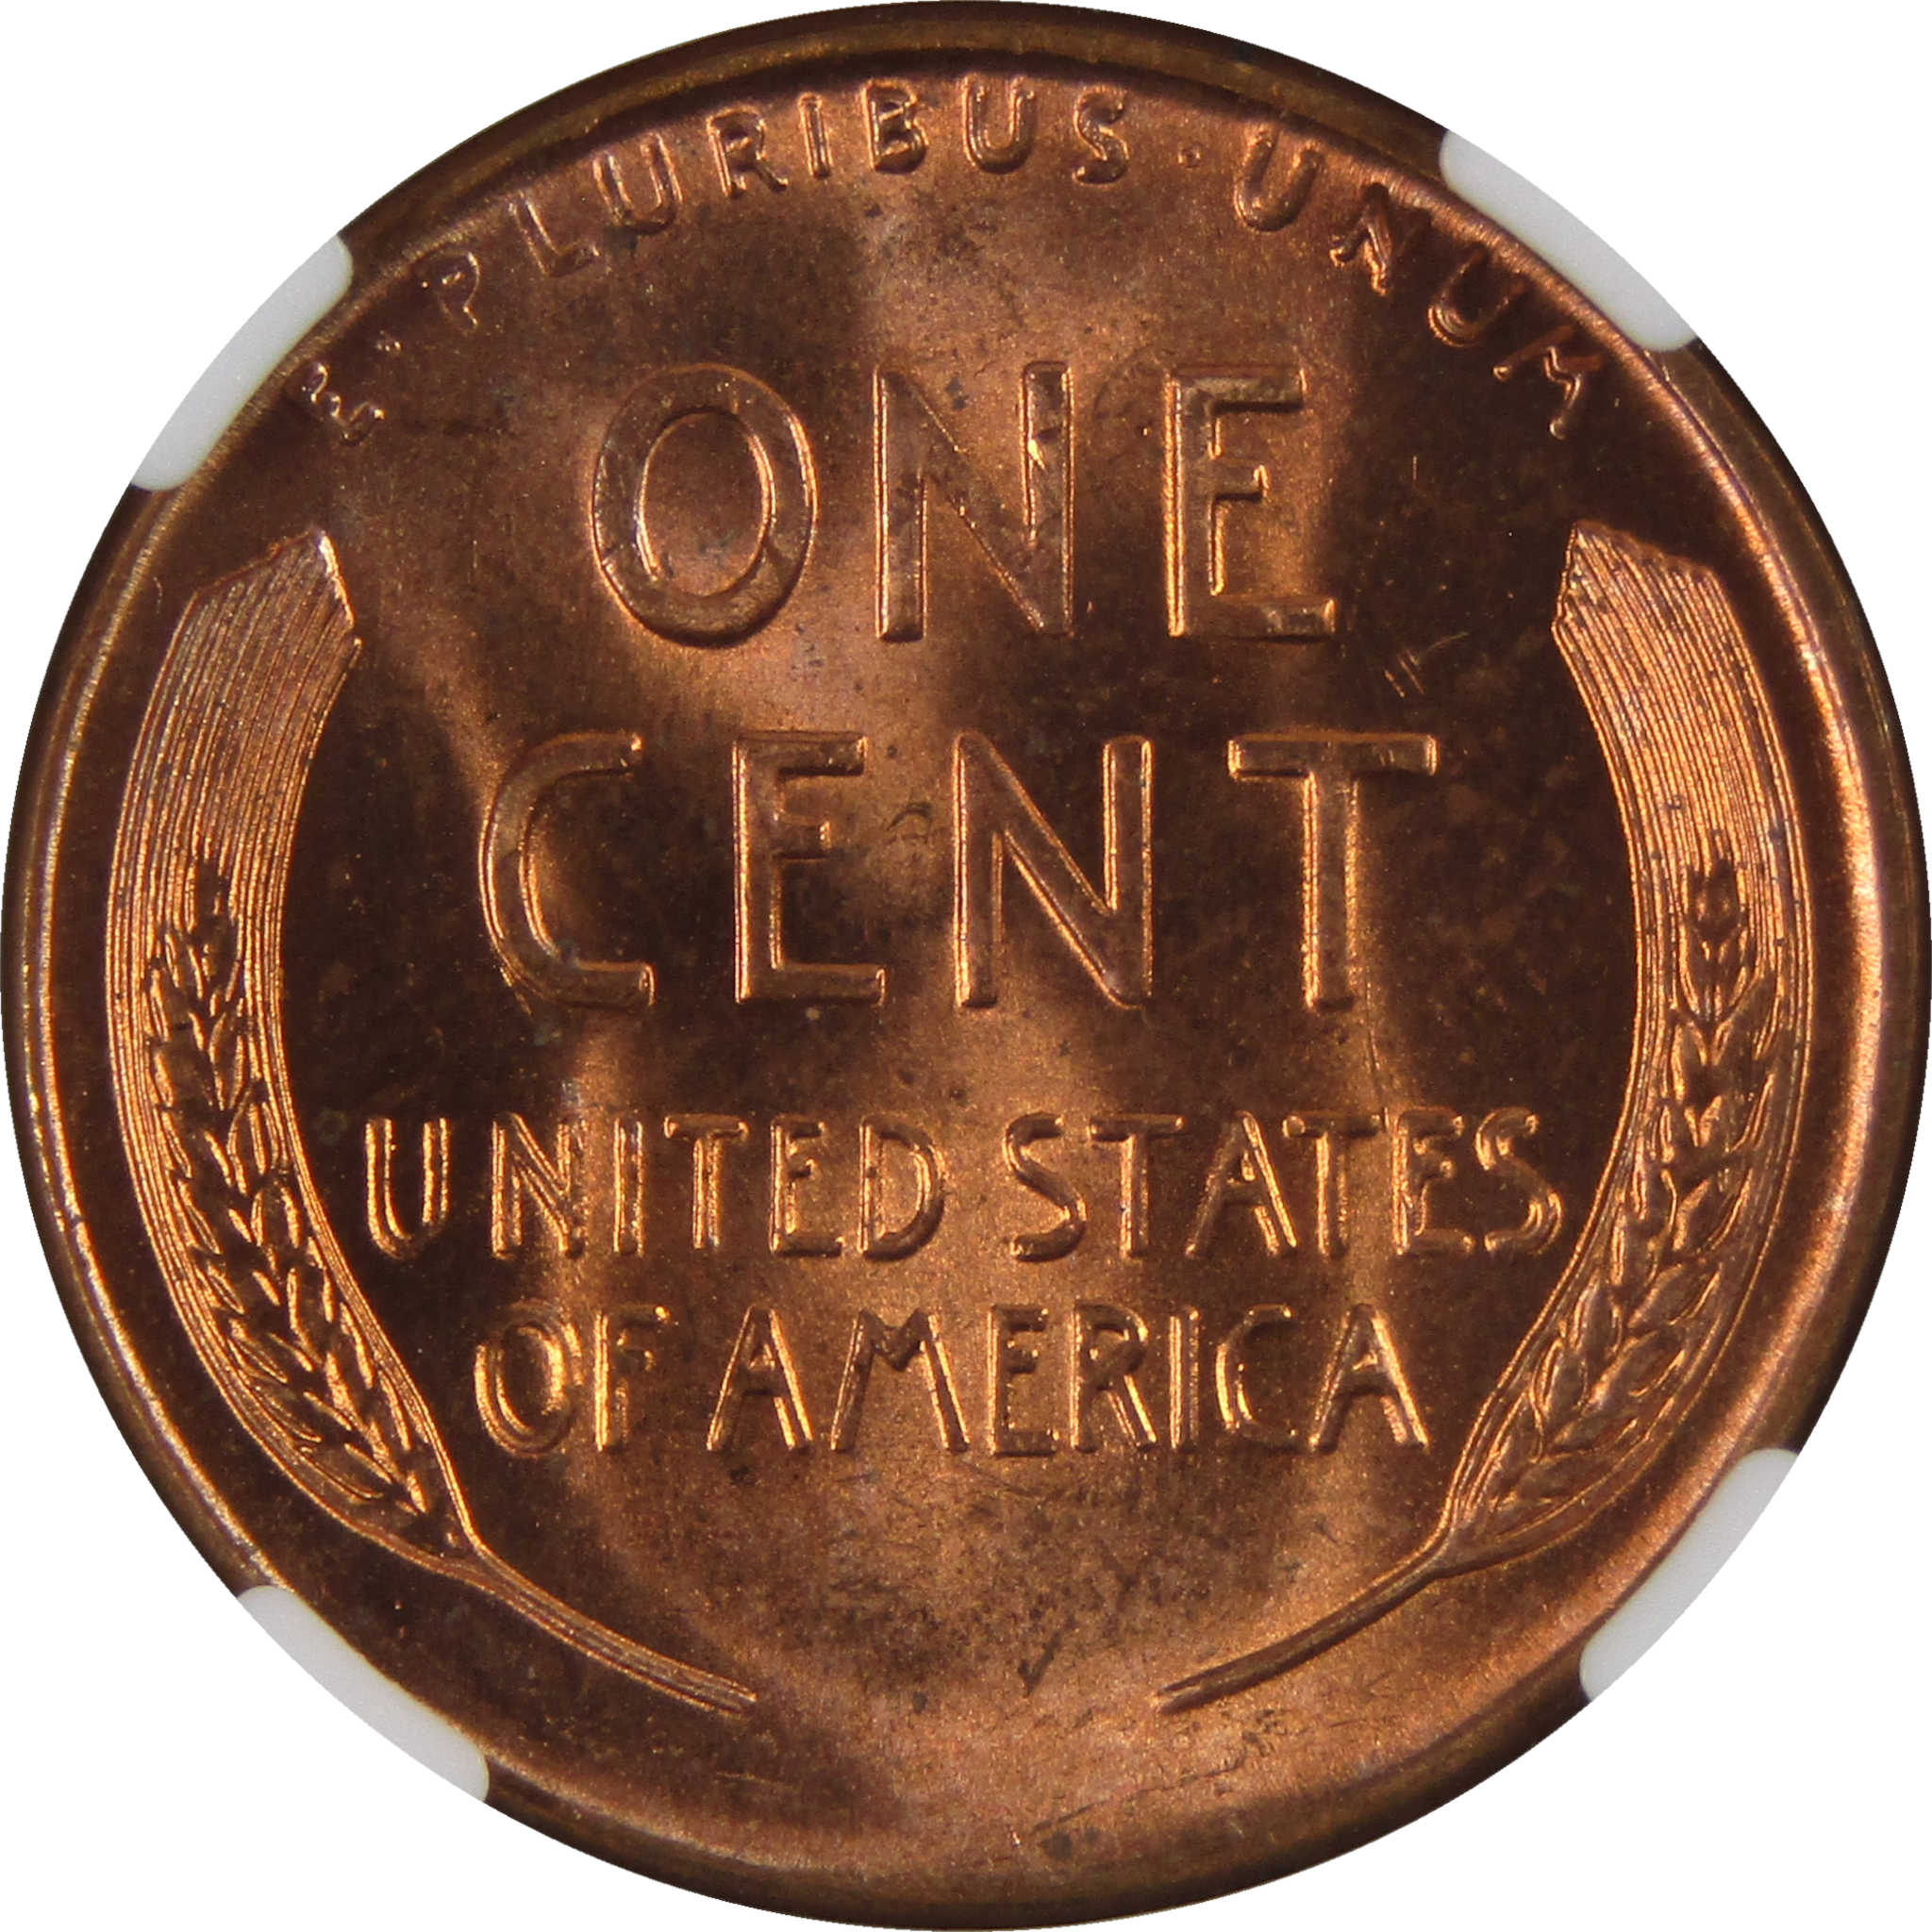 1956 D Lincoln Wheat Cent MS 66 RD NGC Penny Uncirculated SKU:I3652